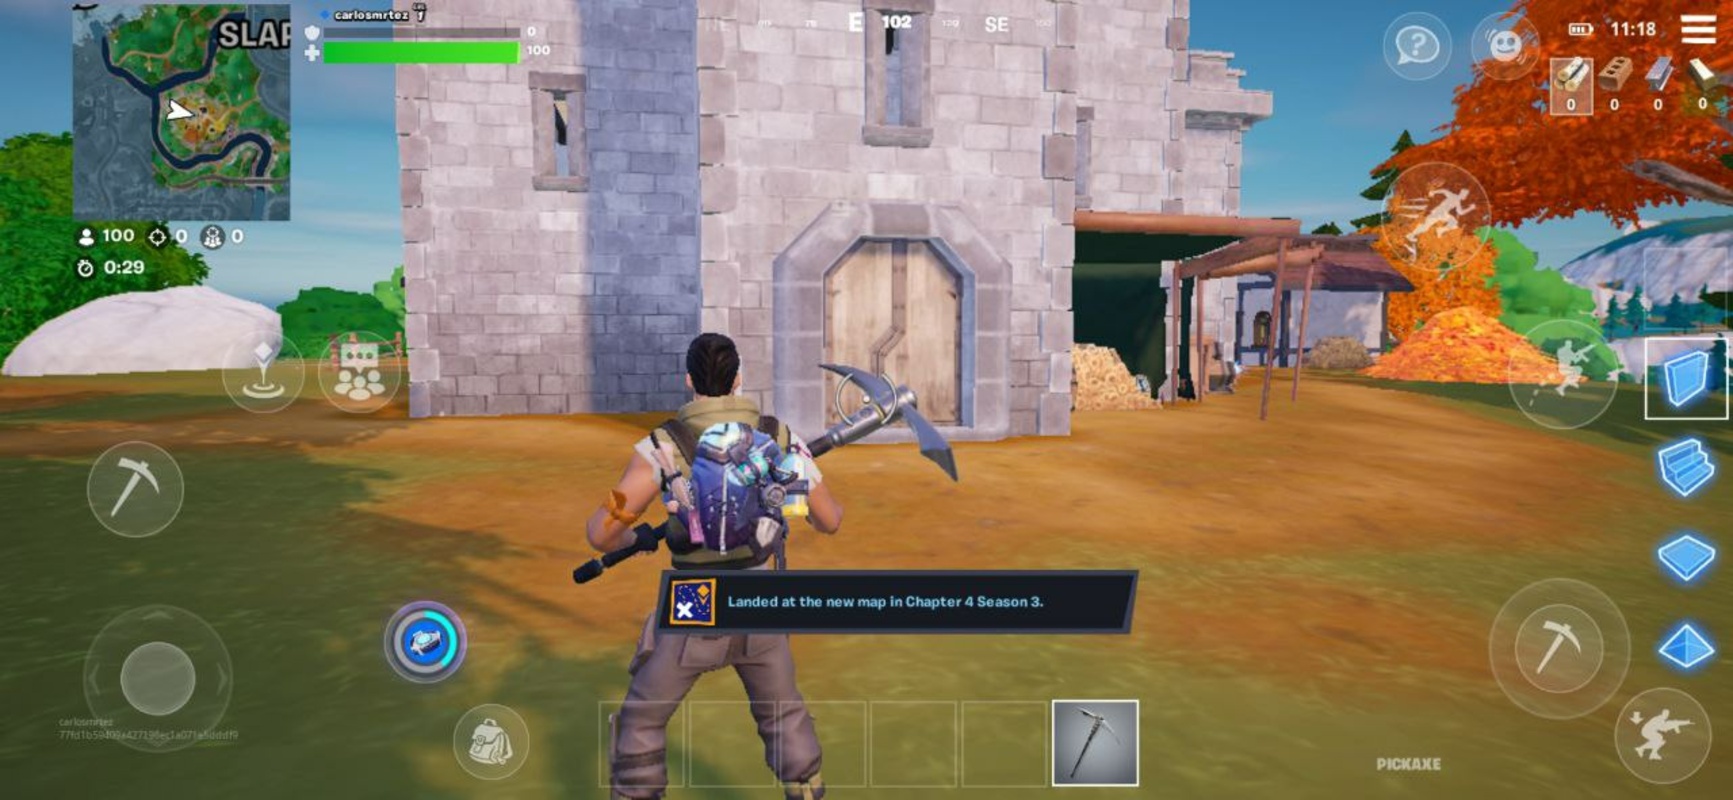 Fortnite 29.10.0-32391220-Android APK for Android Screenshot 12